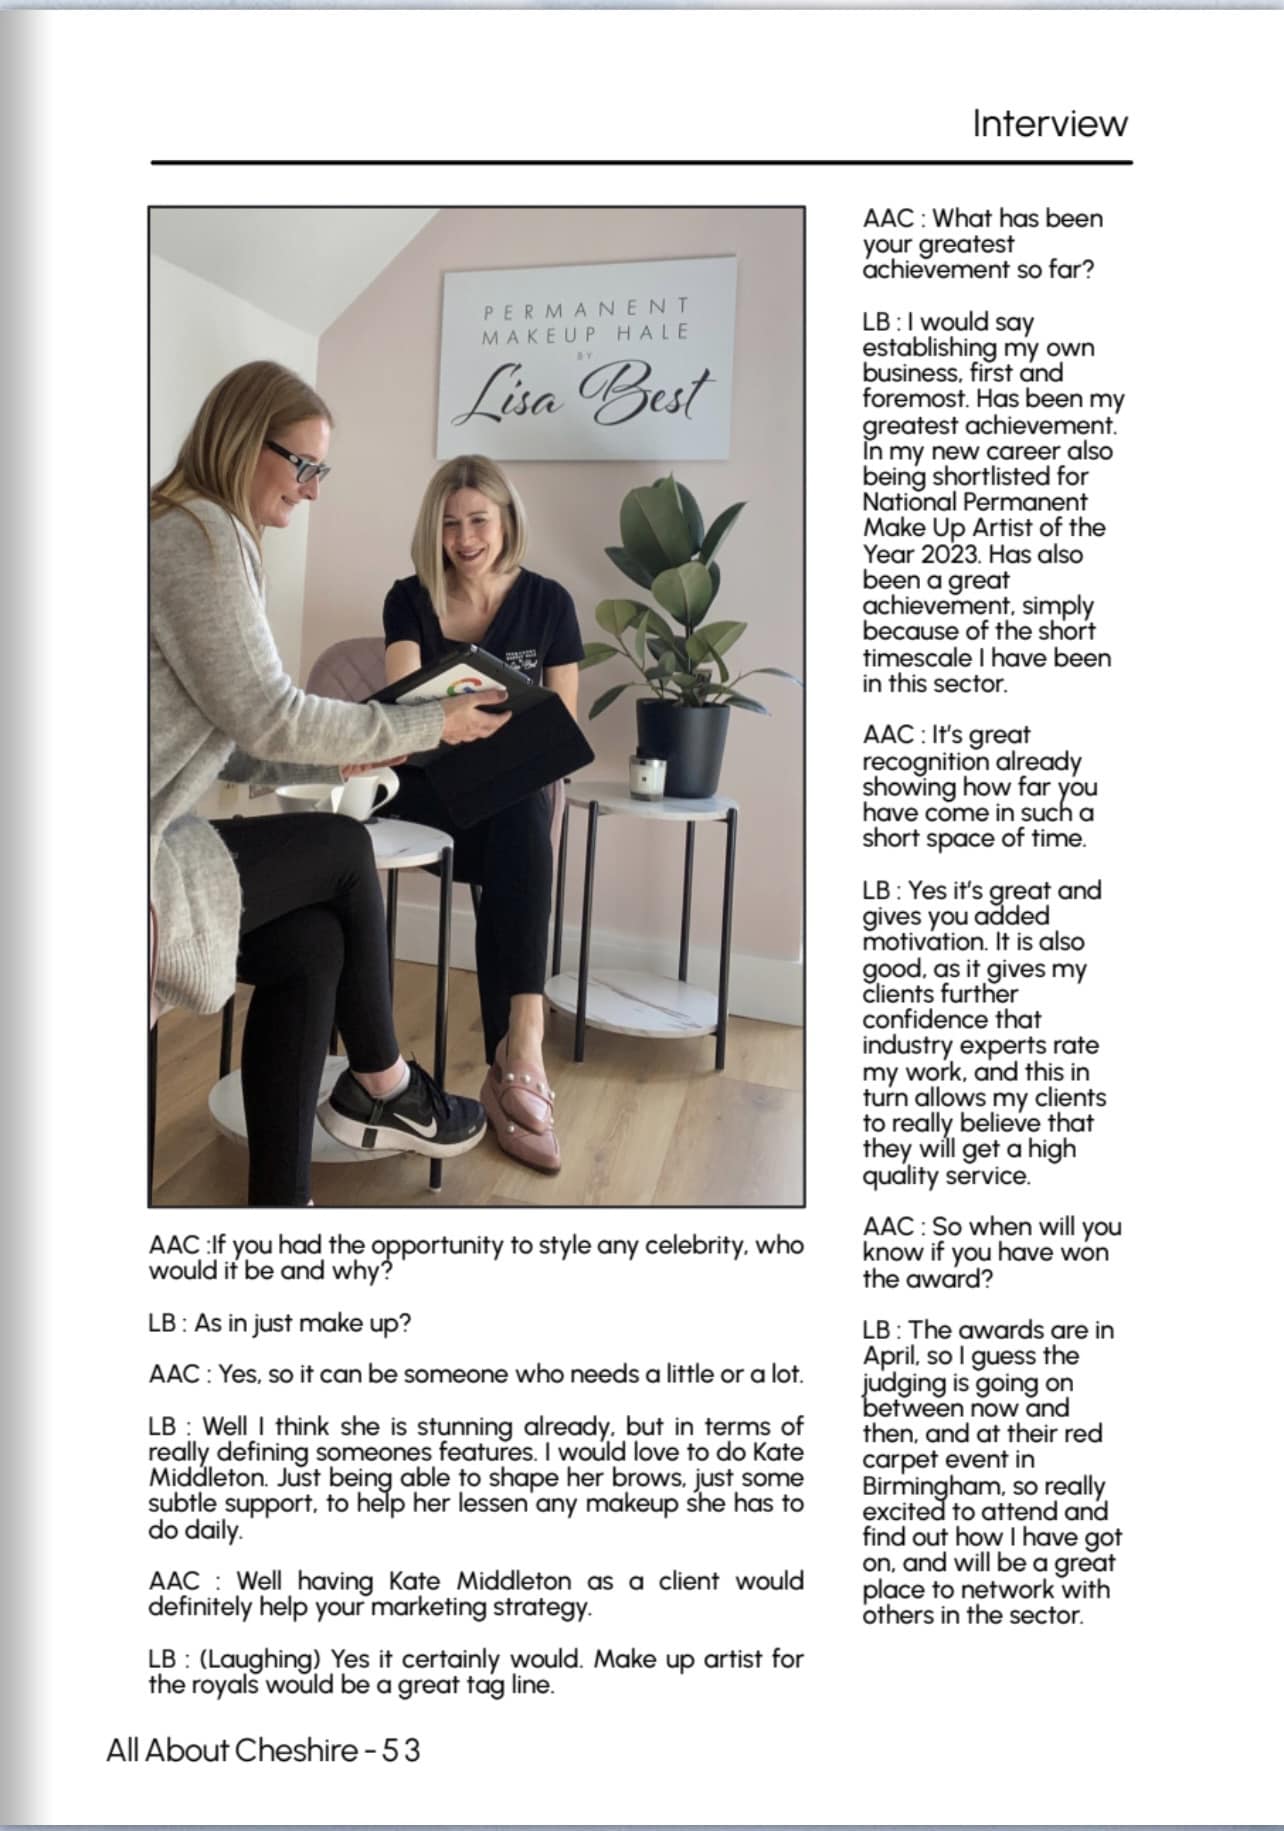 Cheshire Magazine 3rd page transcribe of interview with Lisa Best.